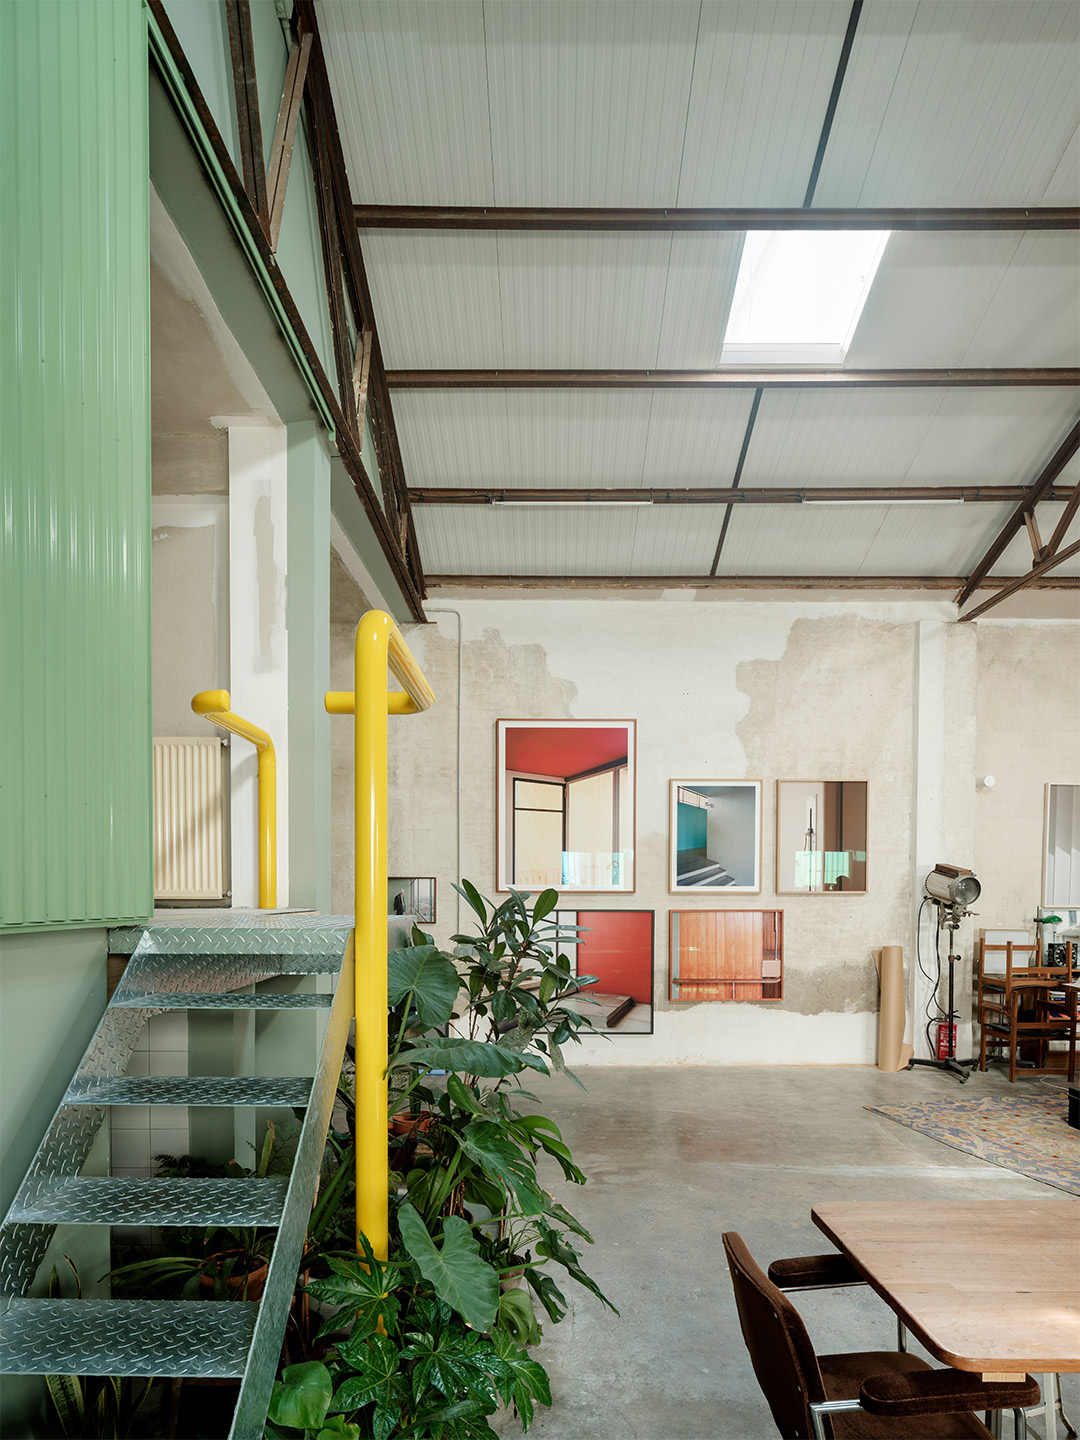 Eulalia warehouse conversion in Madrid, Spain, by Burr Studio